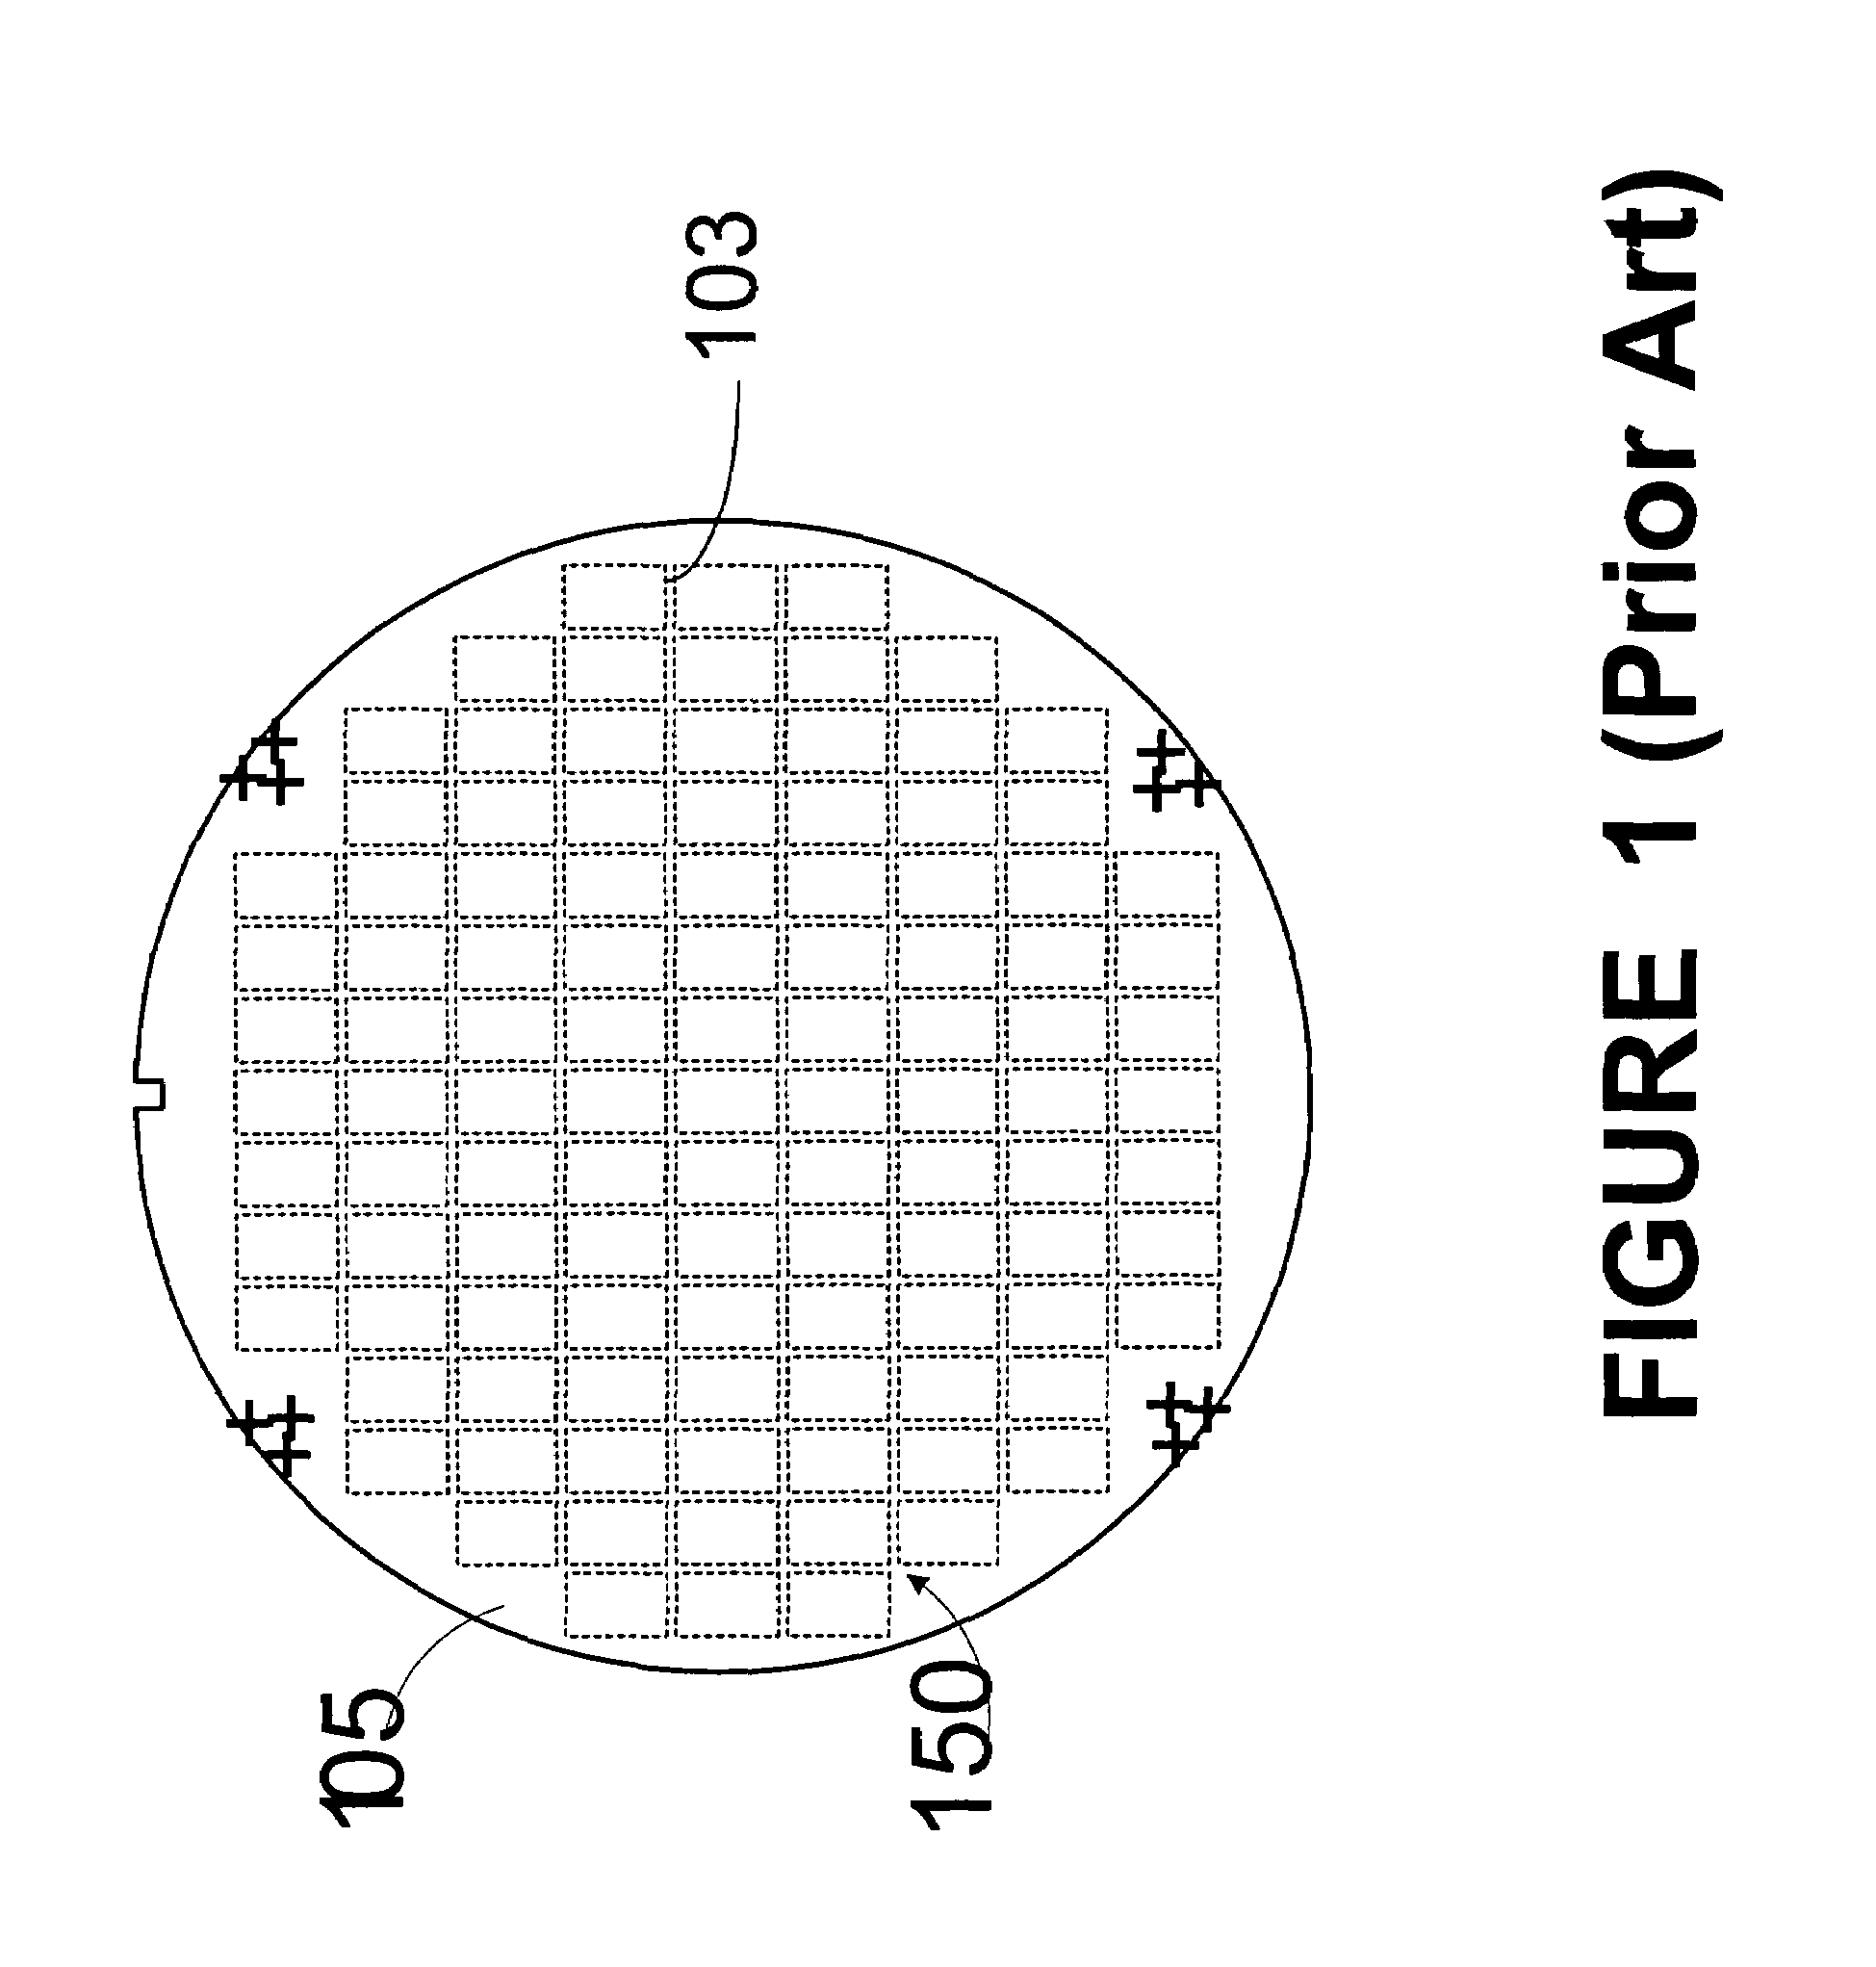 Method and apparatus for impasse detection and resolution